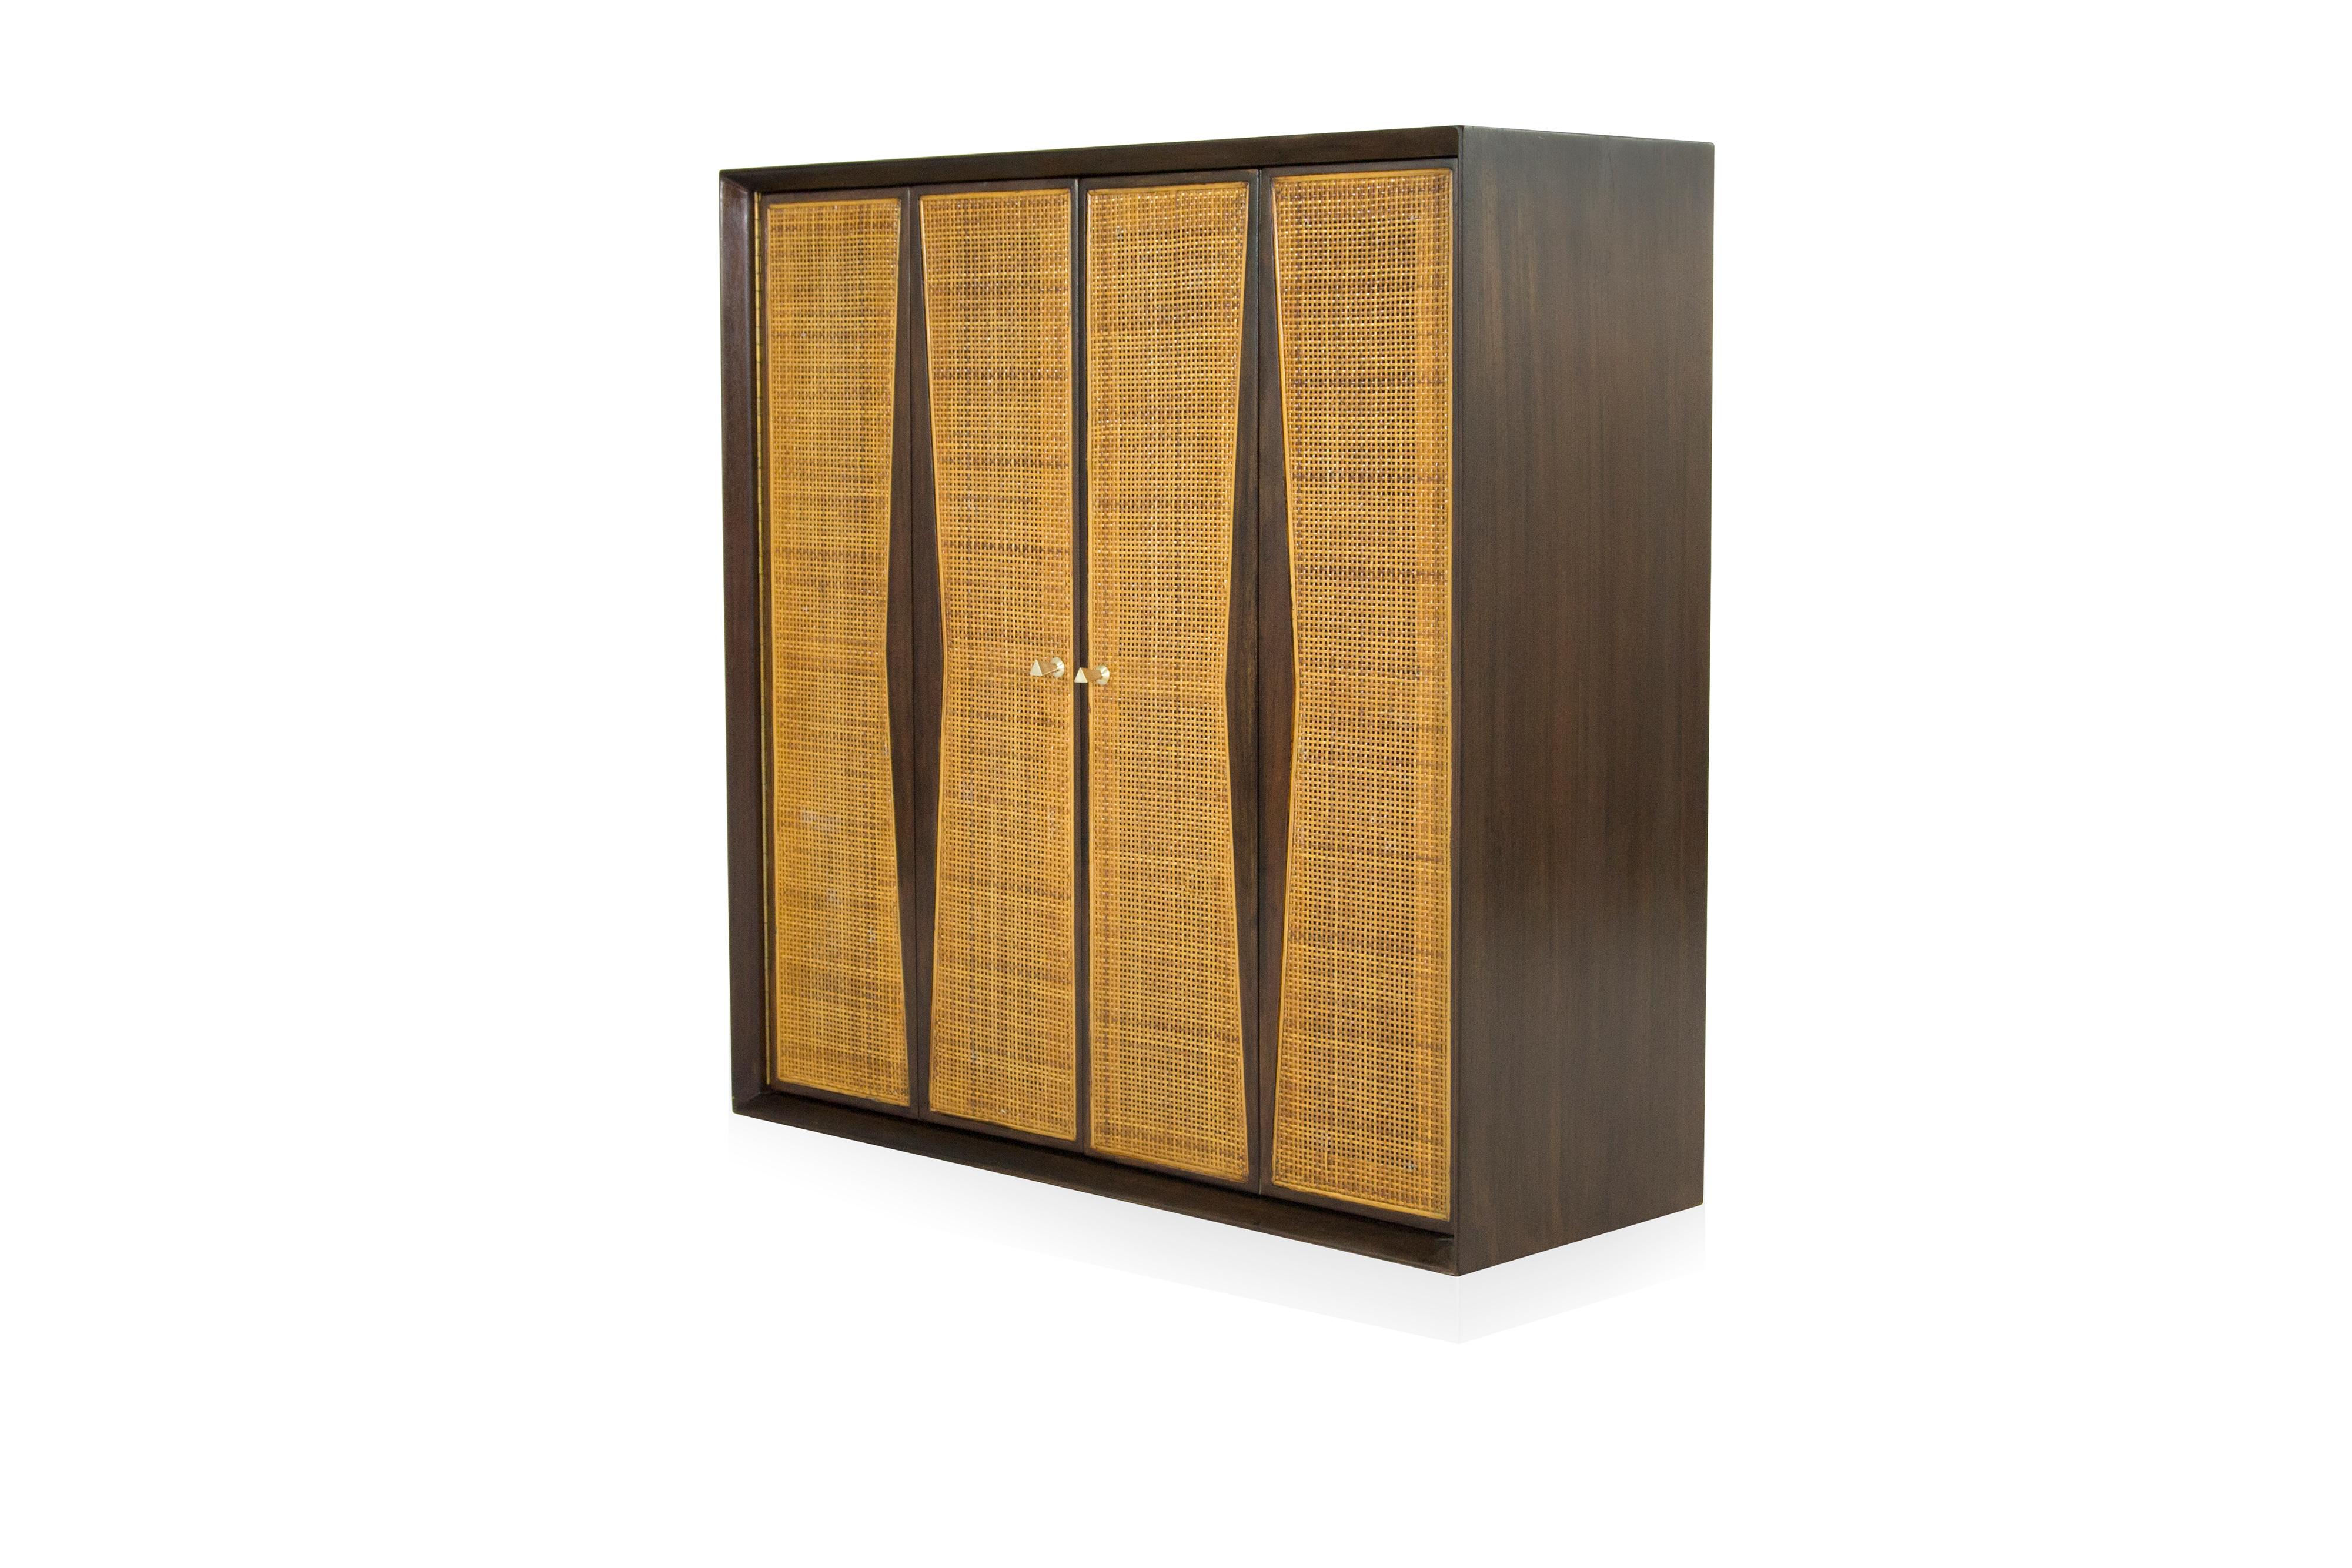 Extremely rare floating liquor cabinet designed by Vladimir Kagan for Grosfeld House, circa 1950s.

Walnut fully restored. Original caning in mint condition.